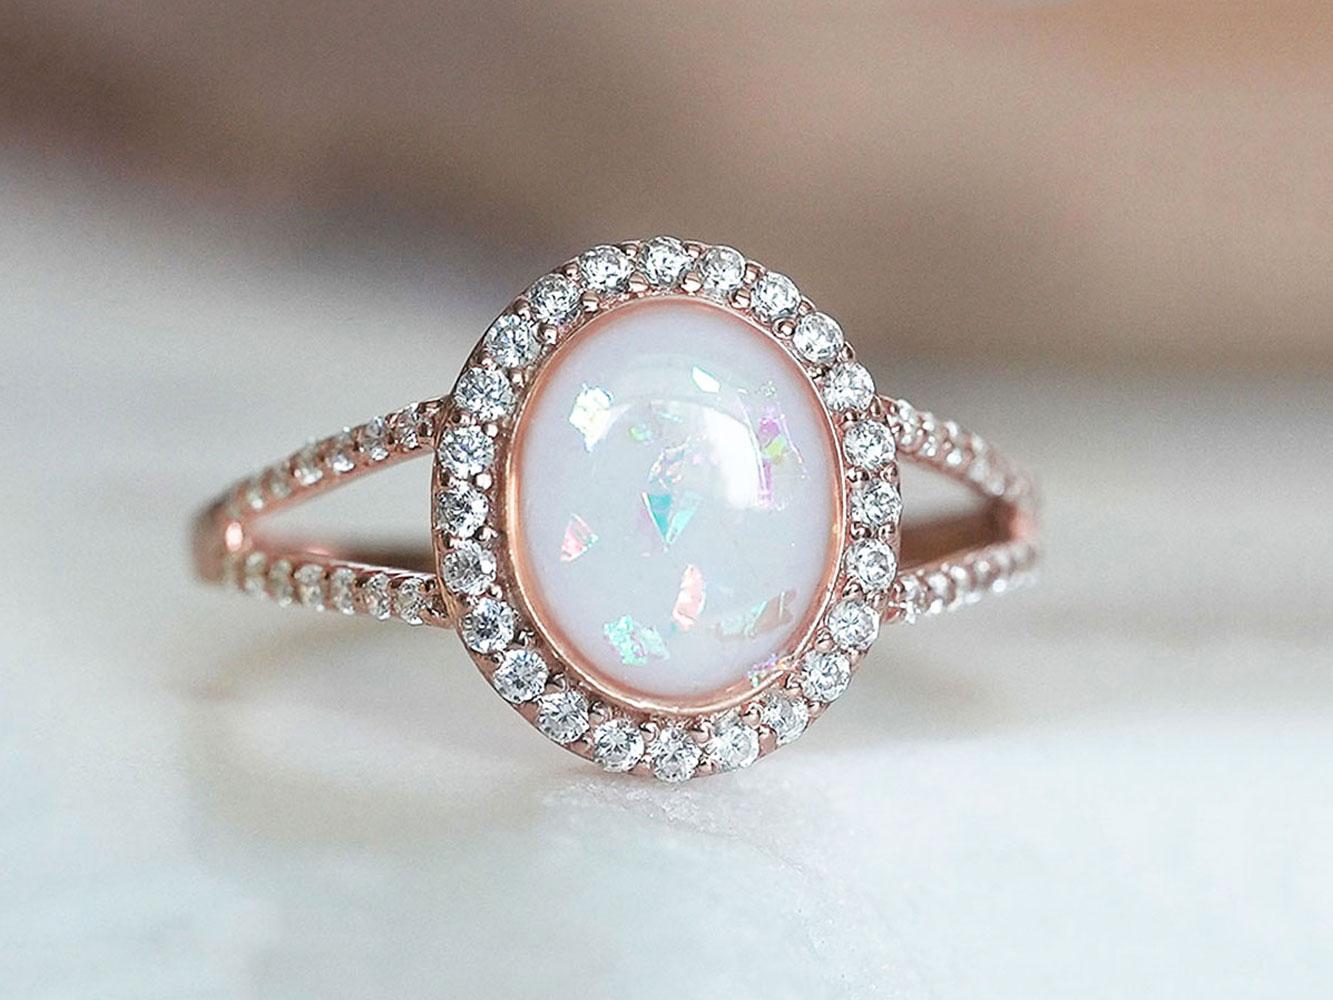 breastmilk jewelry oval ring crystals birth month colors rose gold plating opal effect flakes from KeepsakeMom